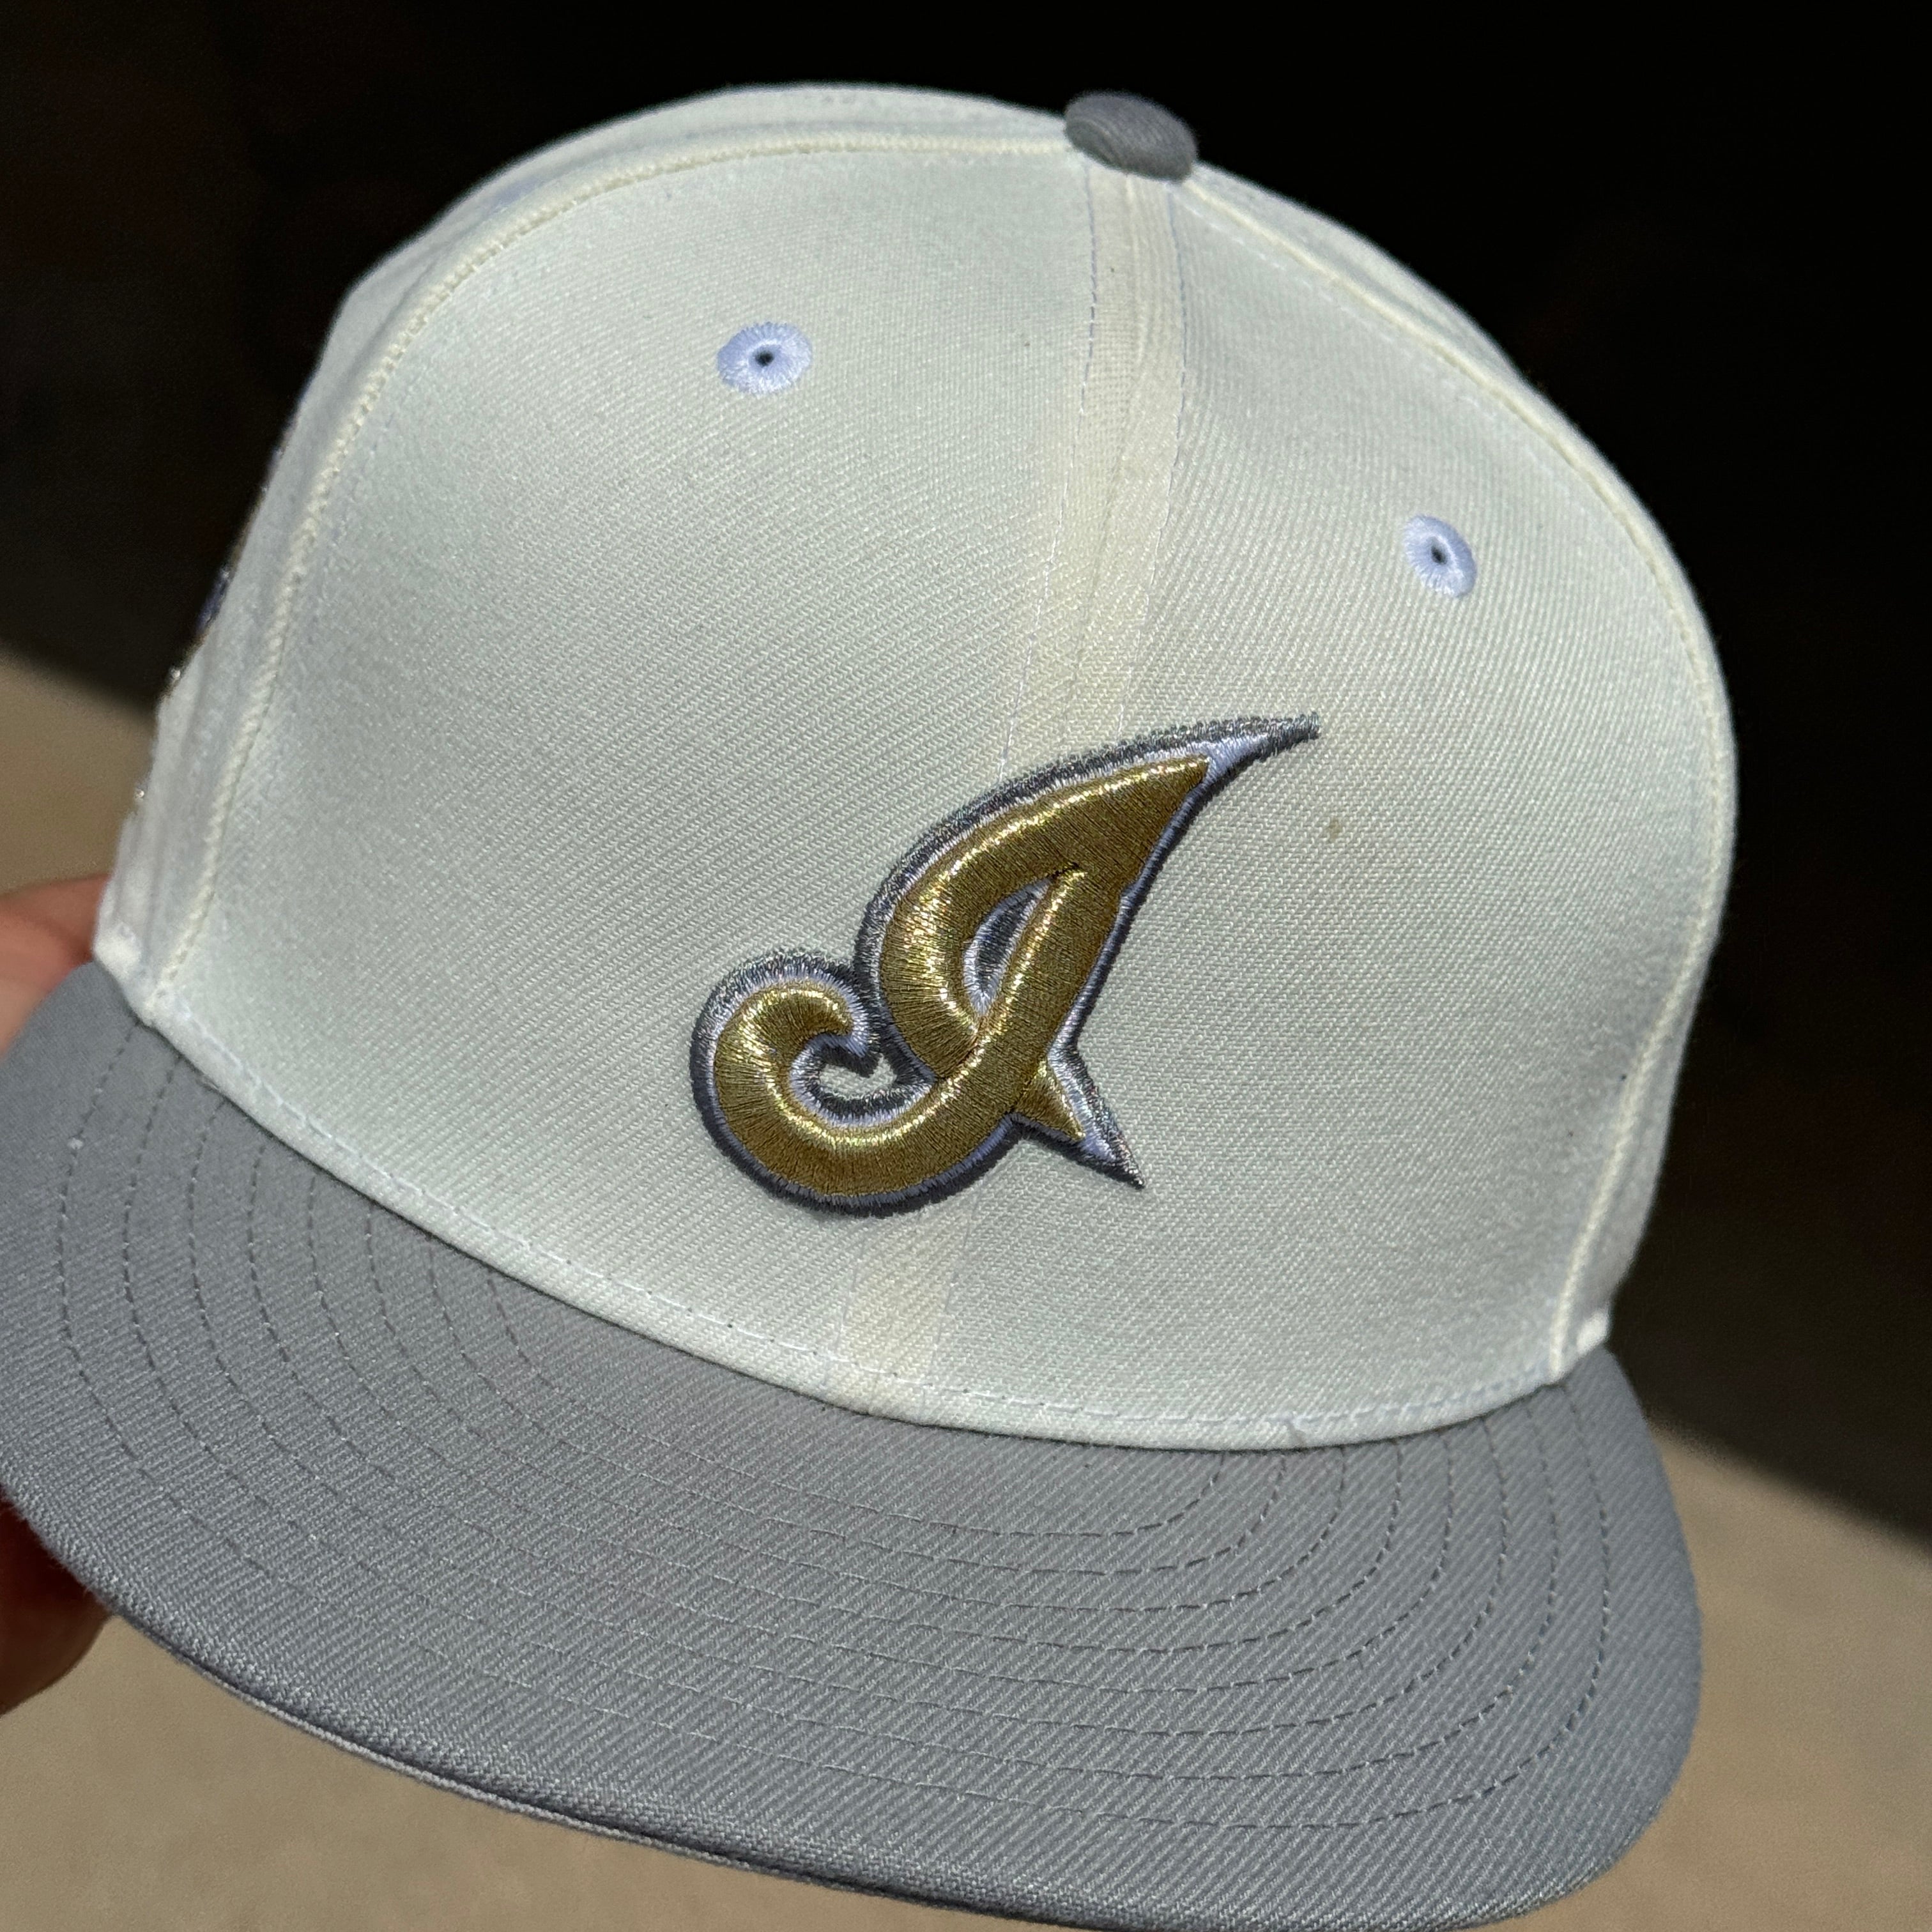 USED 1/8 Chrome Cleveland Indians Jacobs Field Gold 59fifty New Era Fitted Hat Cap